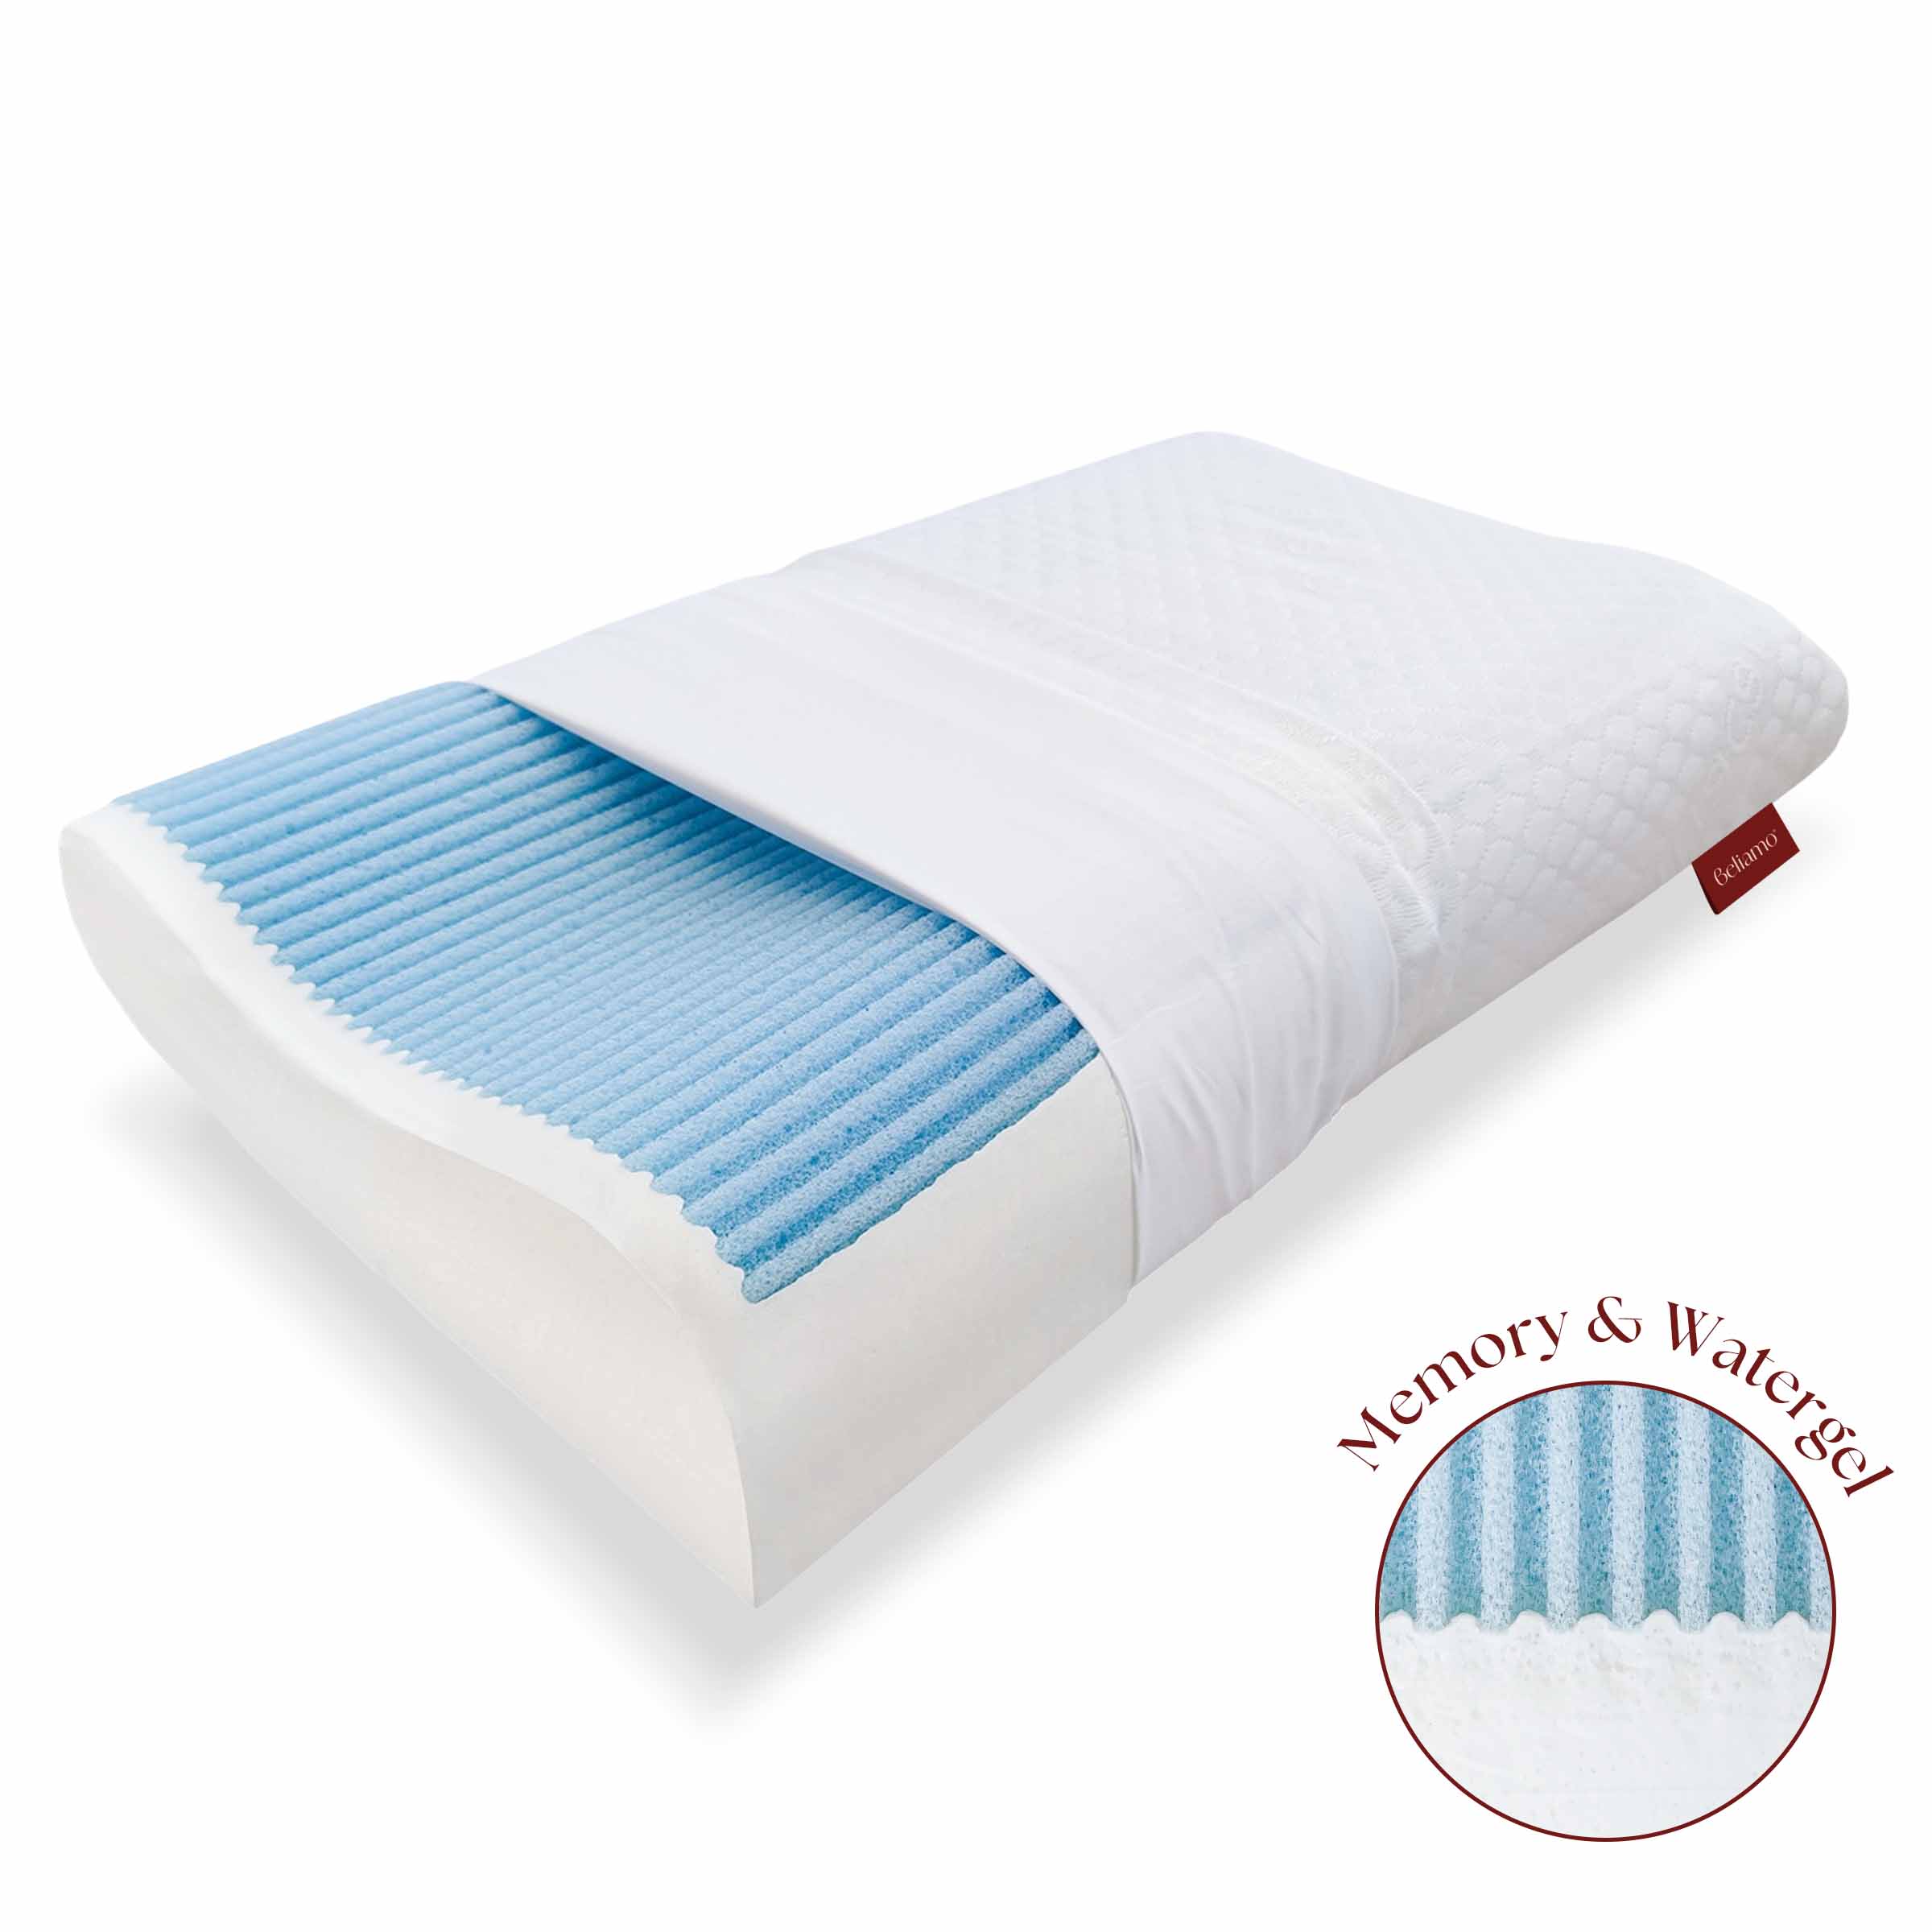 Cervical Pillow Memory Foam and Water Gel - LIGNANO CERVICALE